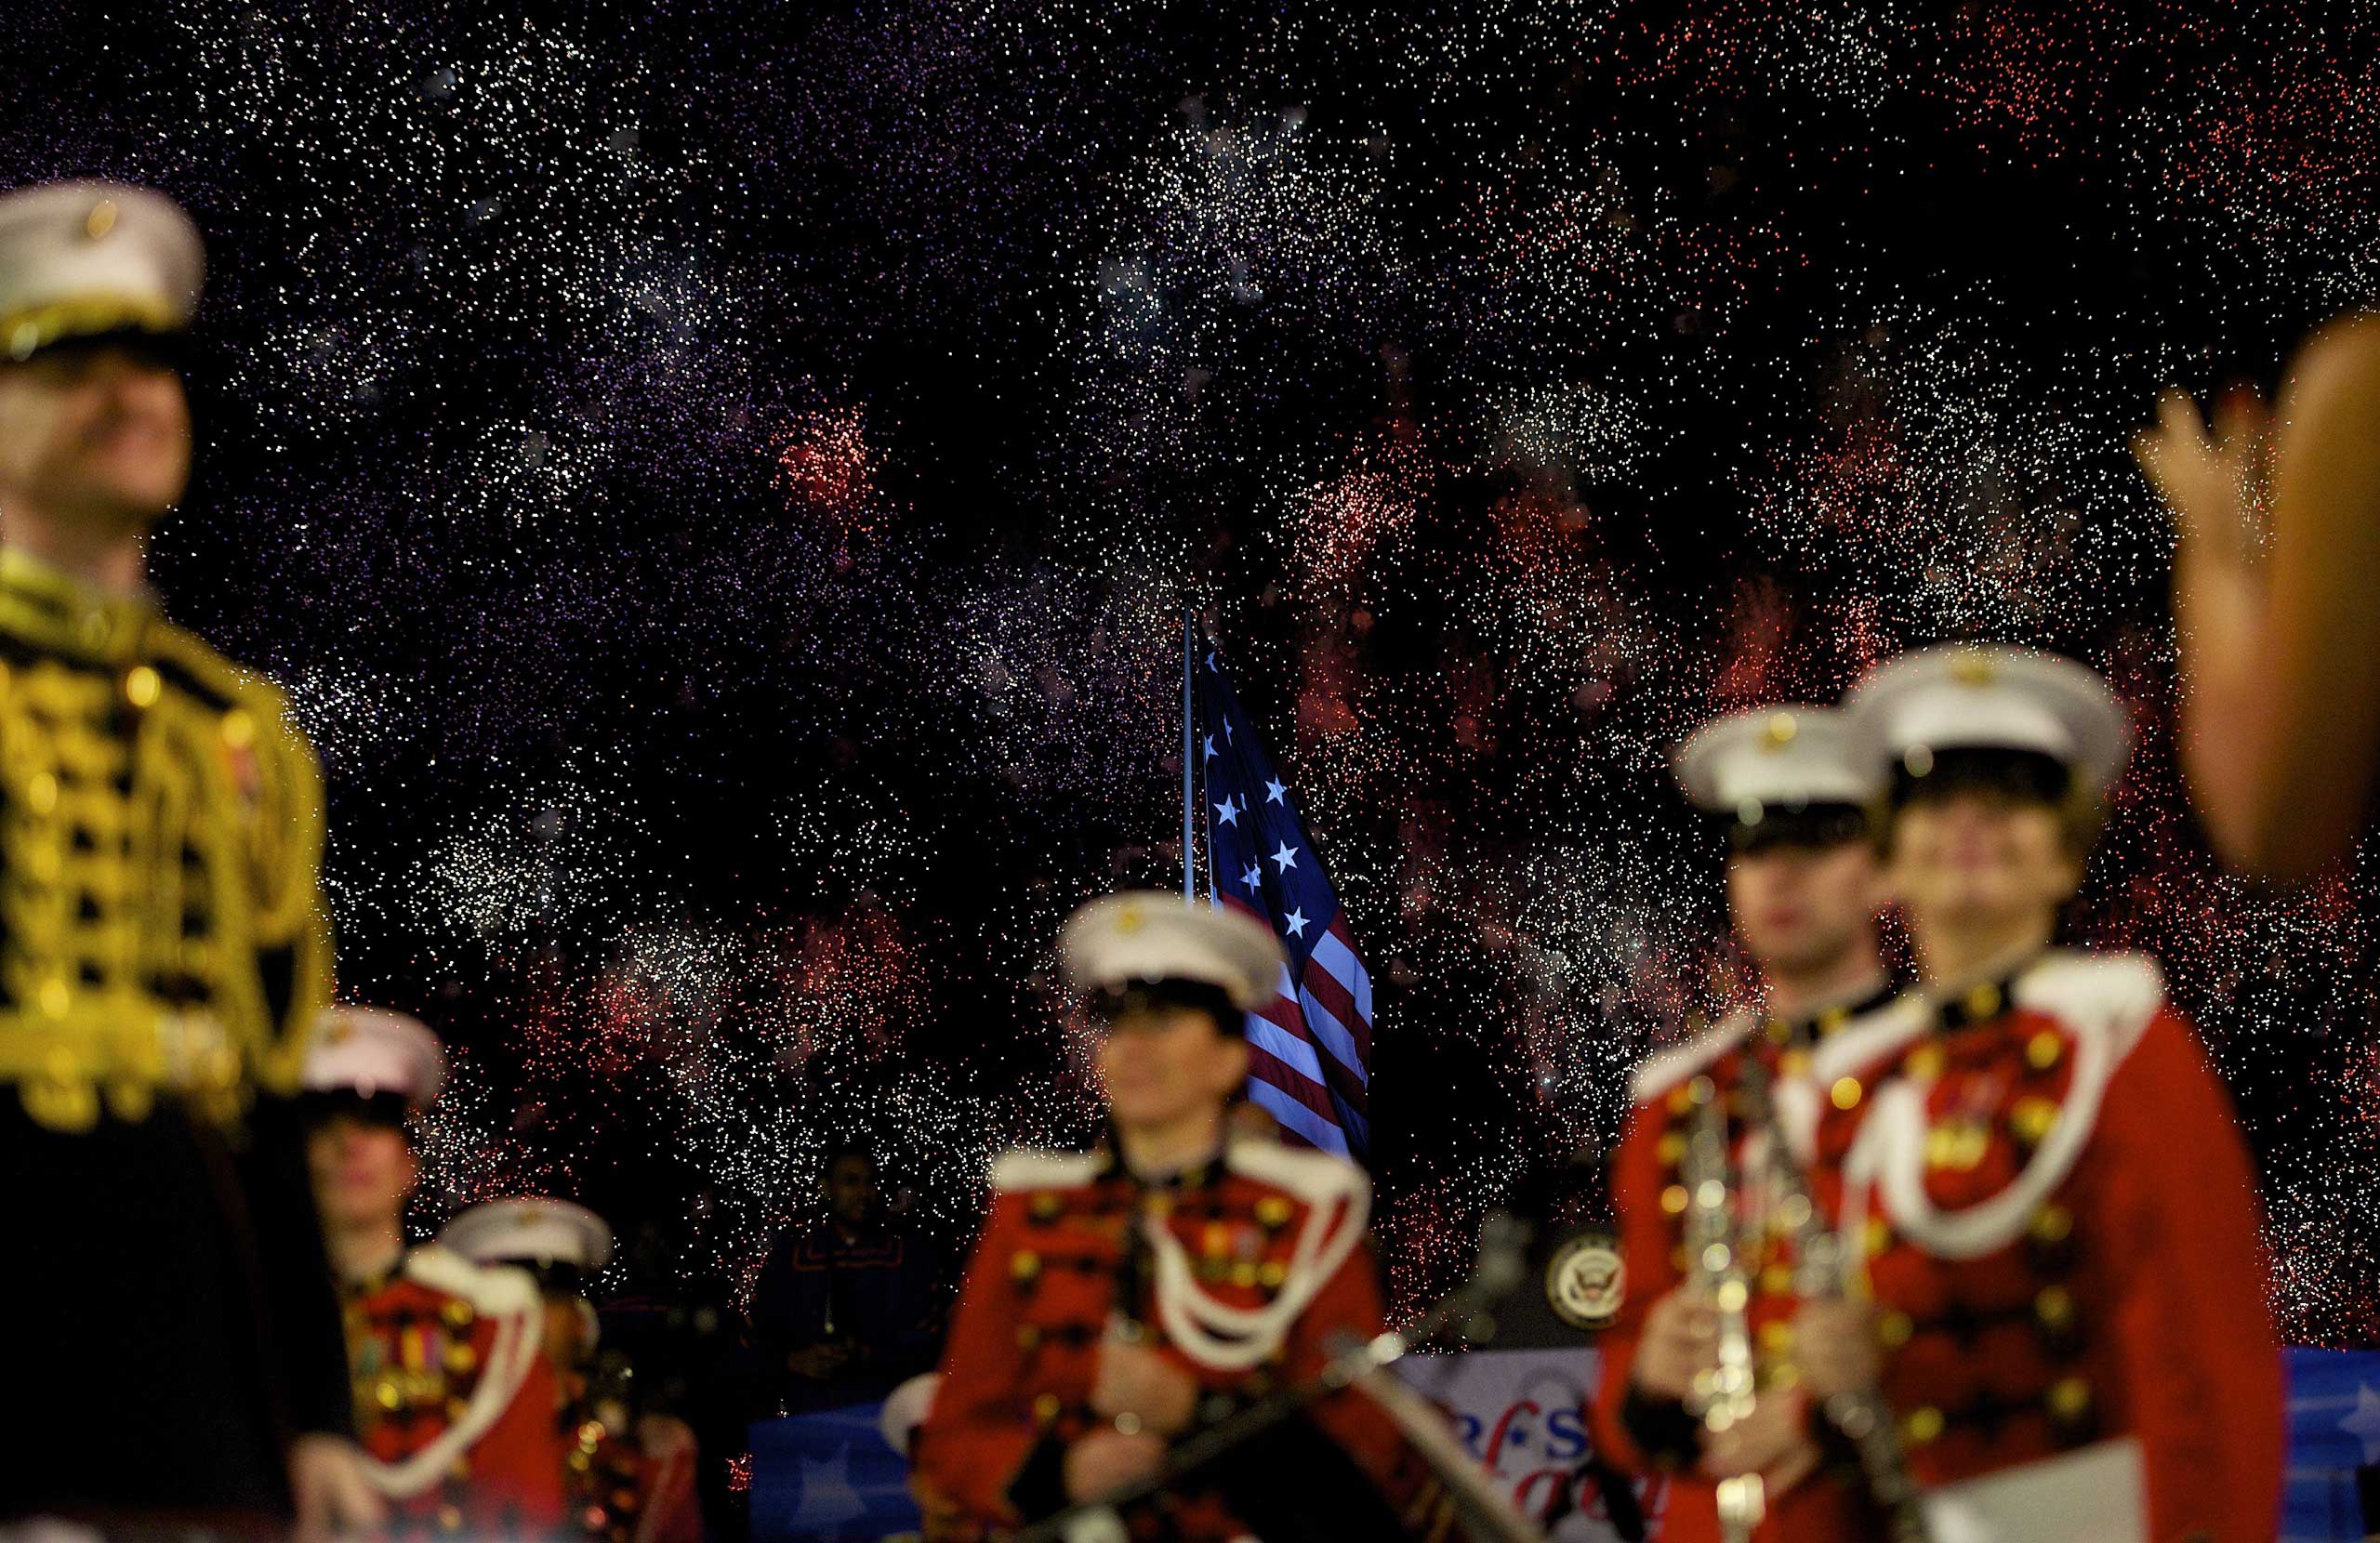 Members of the President's Own Marine Band stand during a fireworks display commemorating the bicentennial of the writing of The Star-Spangled Banner at Fort McHenry National Historic Park on Sept. 13, 2014 in Baltimore.